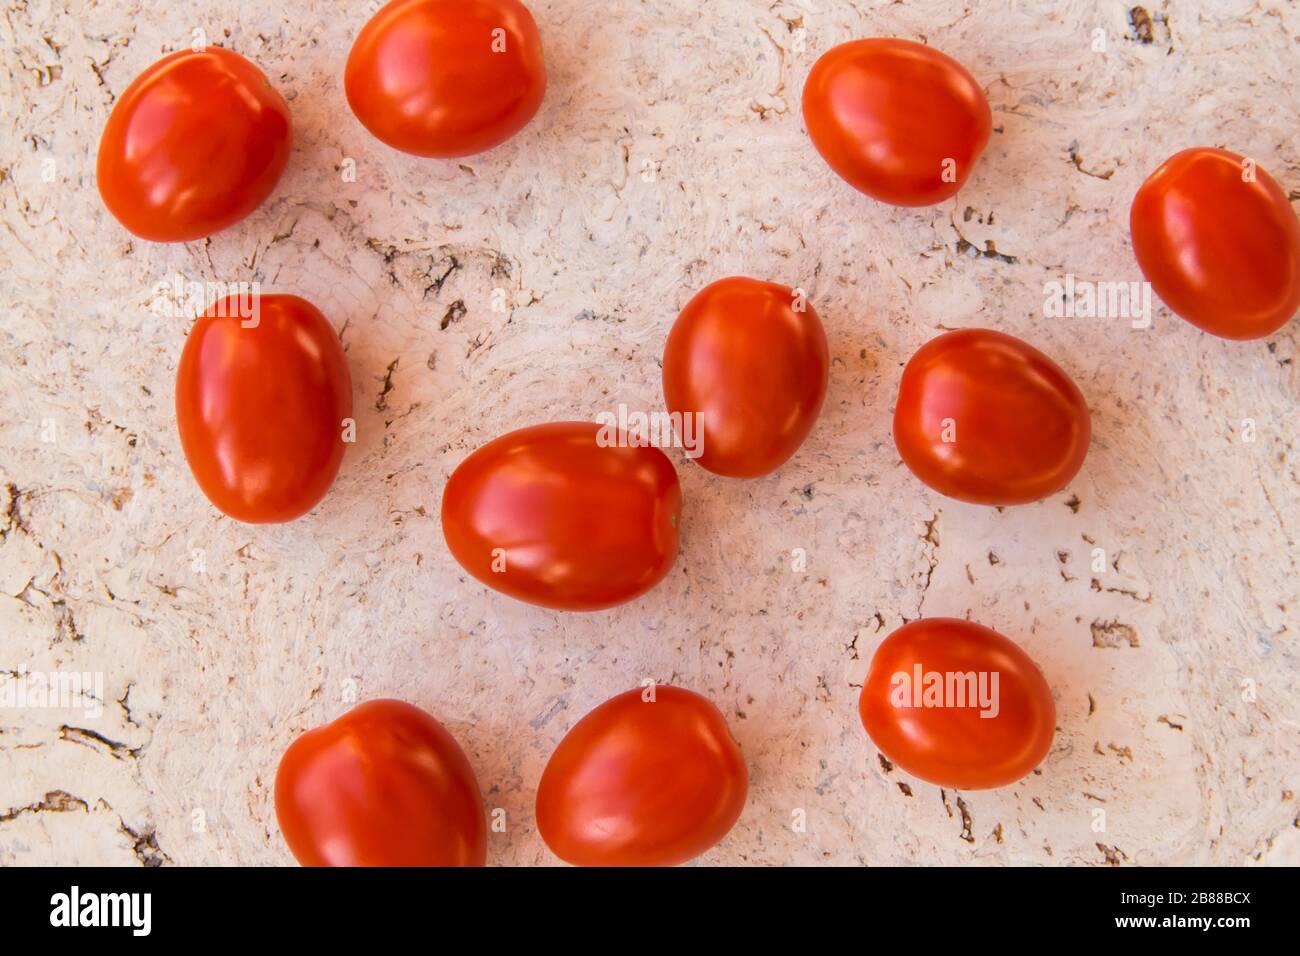 Red fresh tomatoes on the natural cork background. Stock Photo